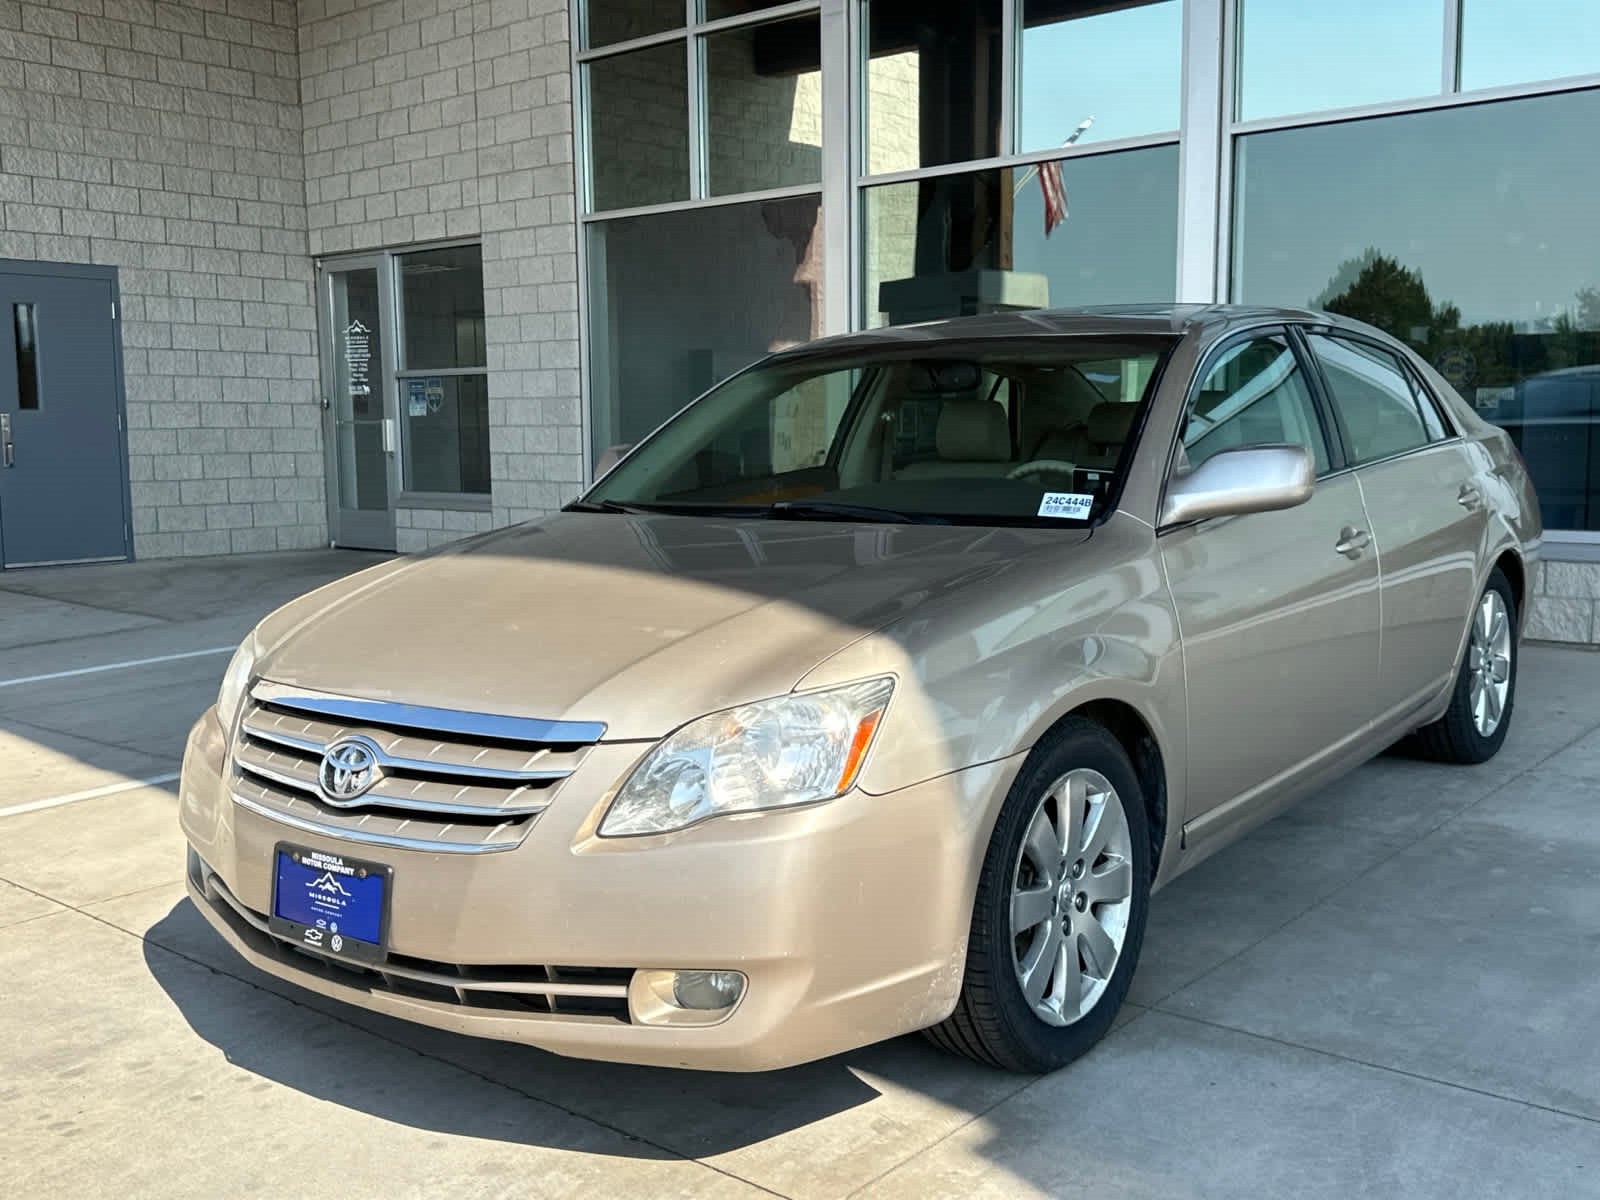 Used 2007 Toyota Avalon XLS with VIN 4T1BK36B47U190400 for sale in Missoula, MT